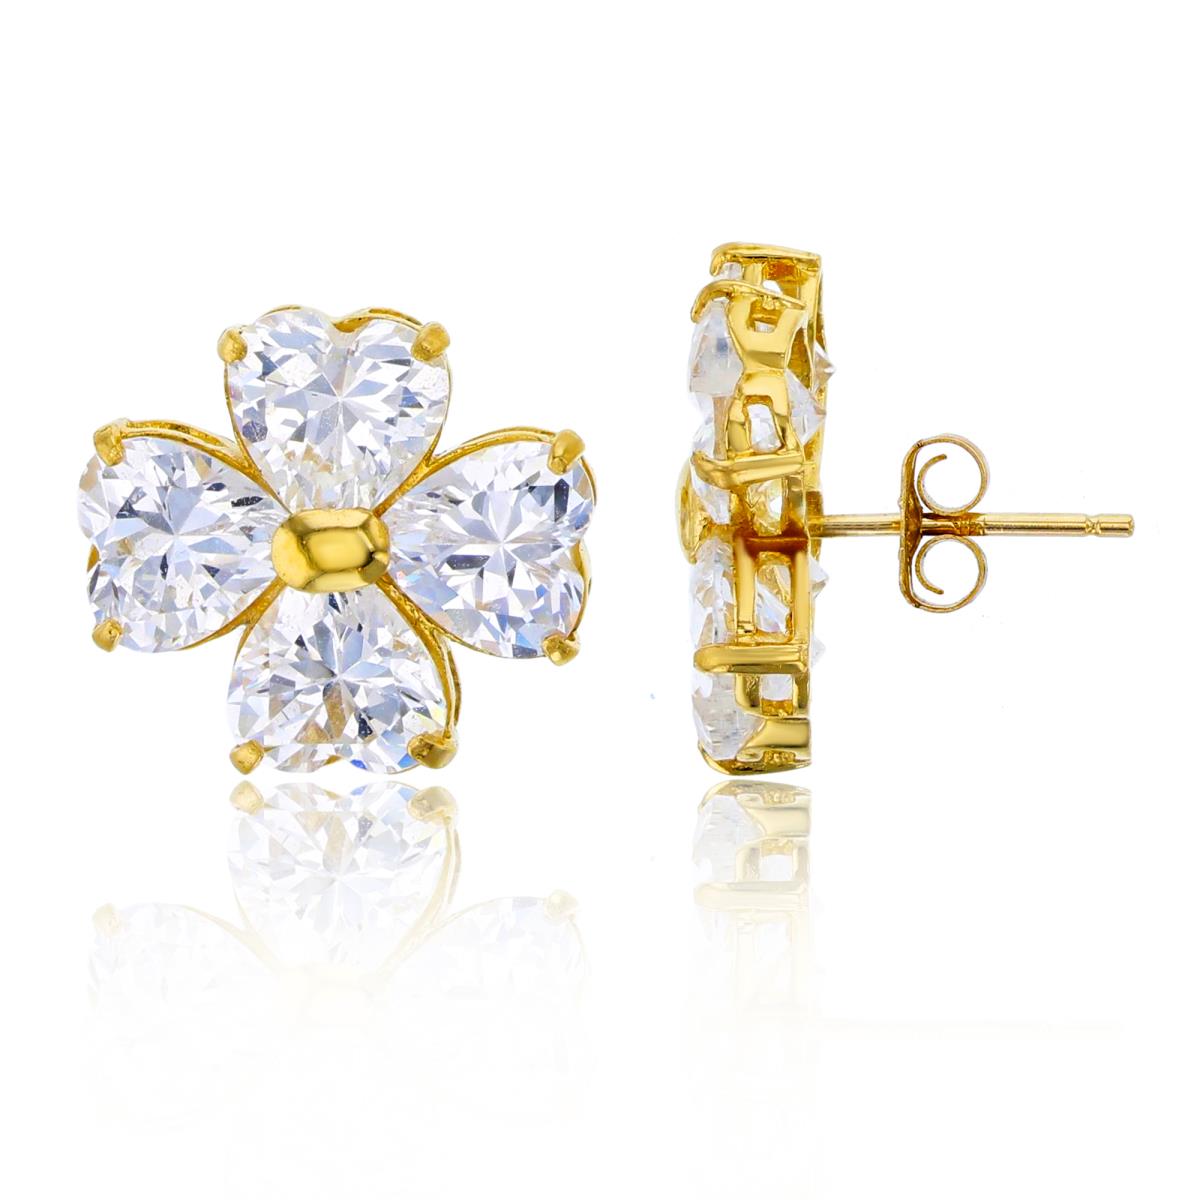 14K Yellow Gold 6mm HS CZ Flower Stud Earring with 4.5mm Clutch